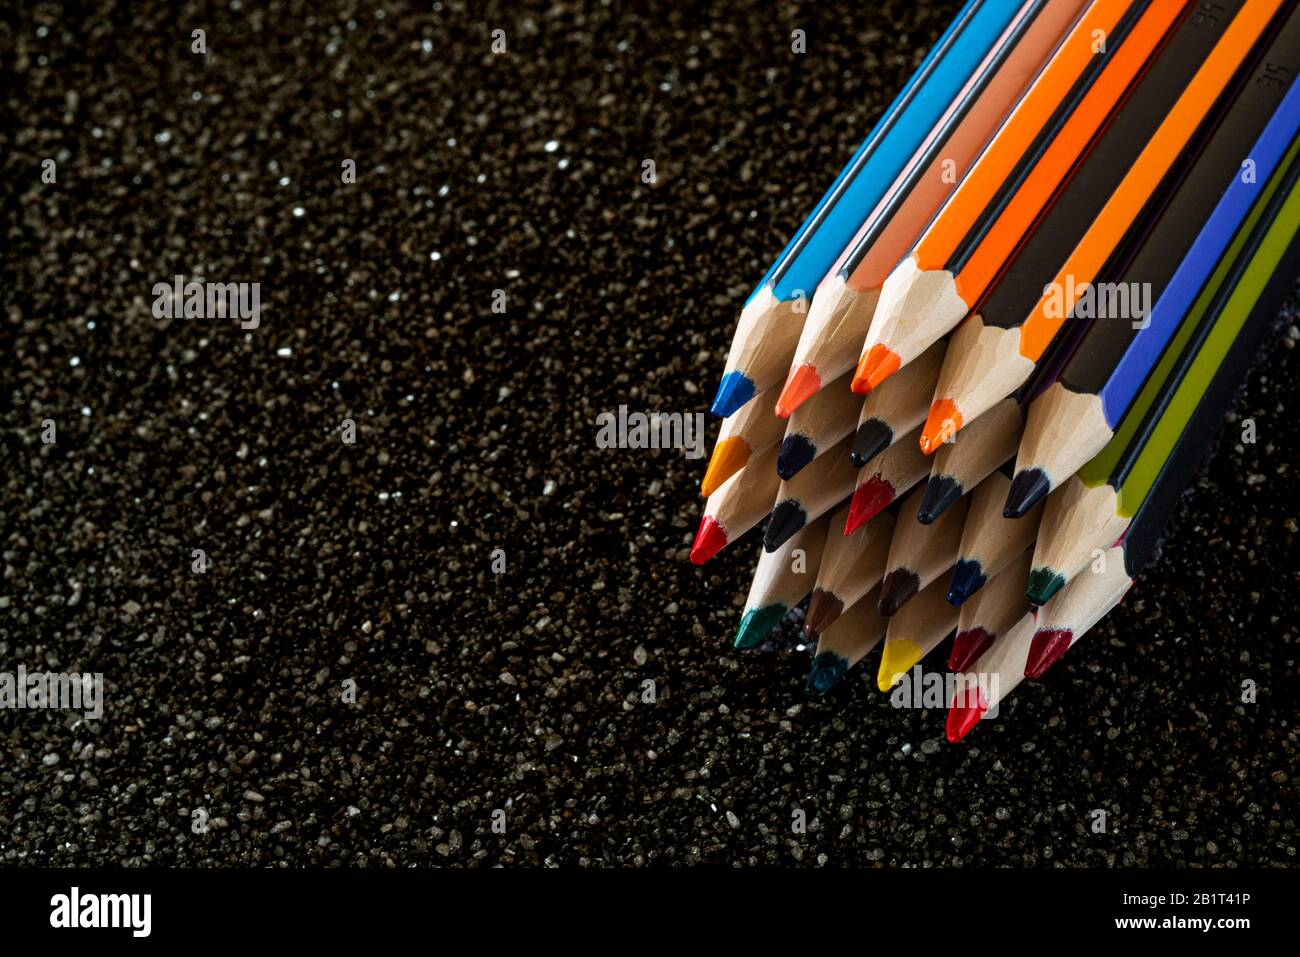 Group of pencils laying on black sand. Colourful pencils. Stock Photo